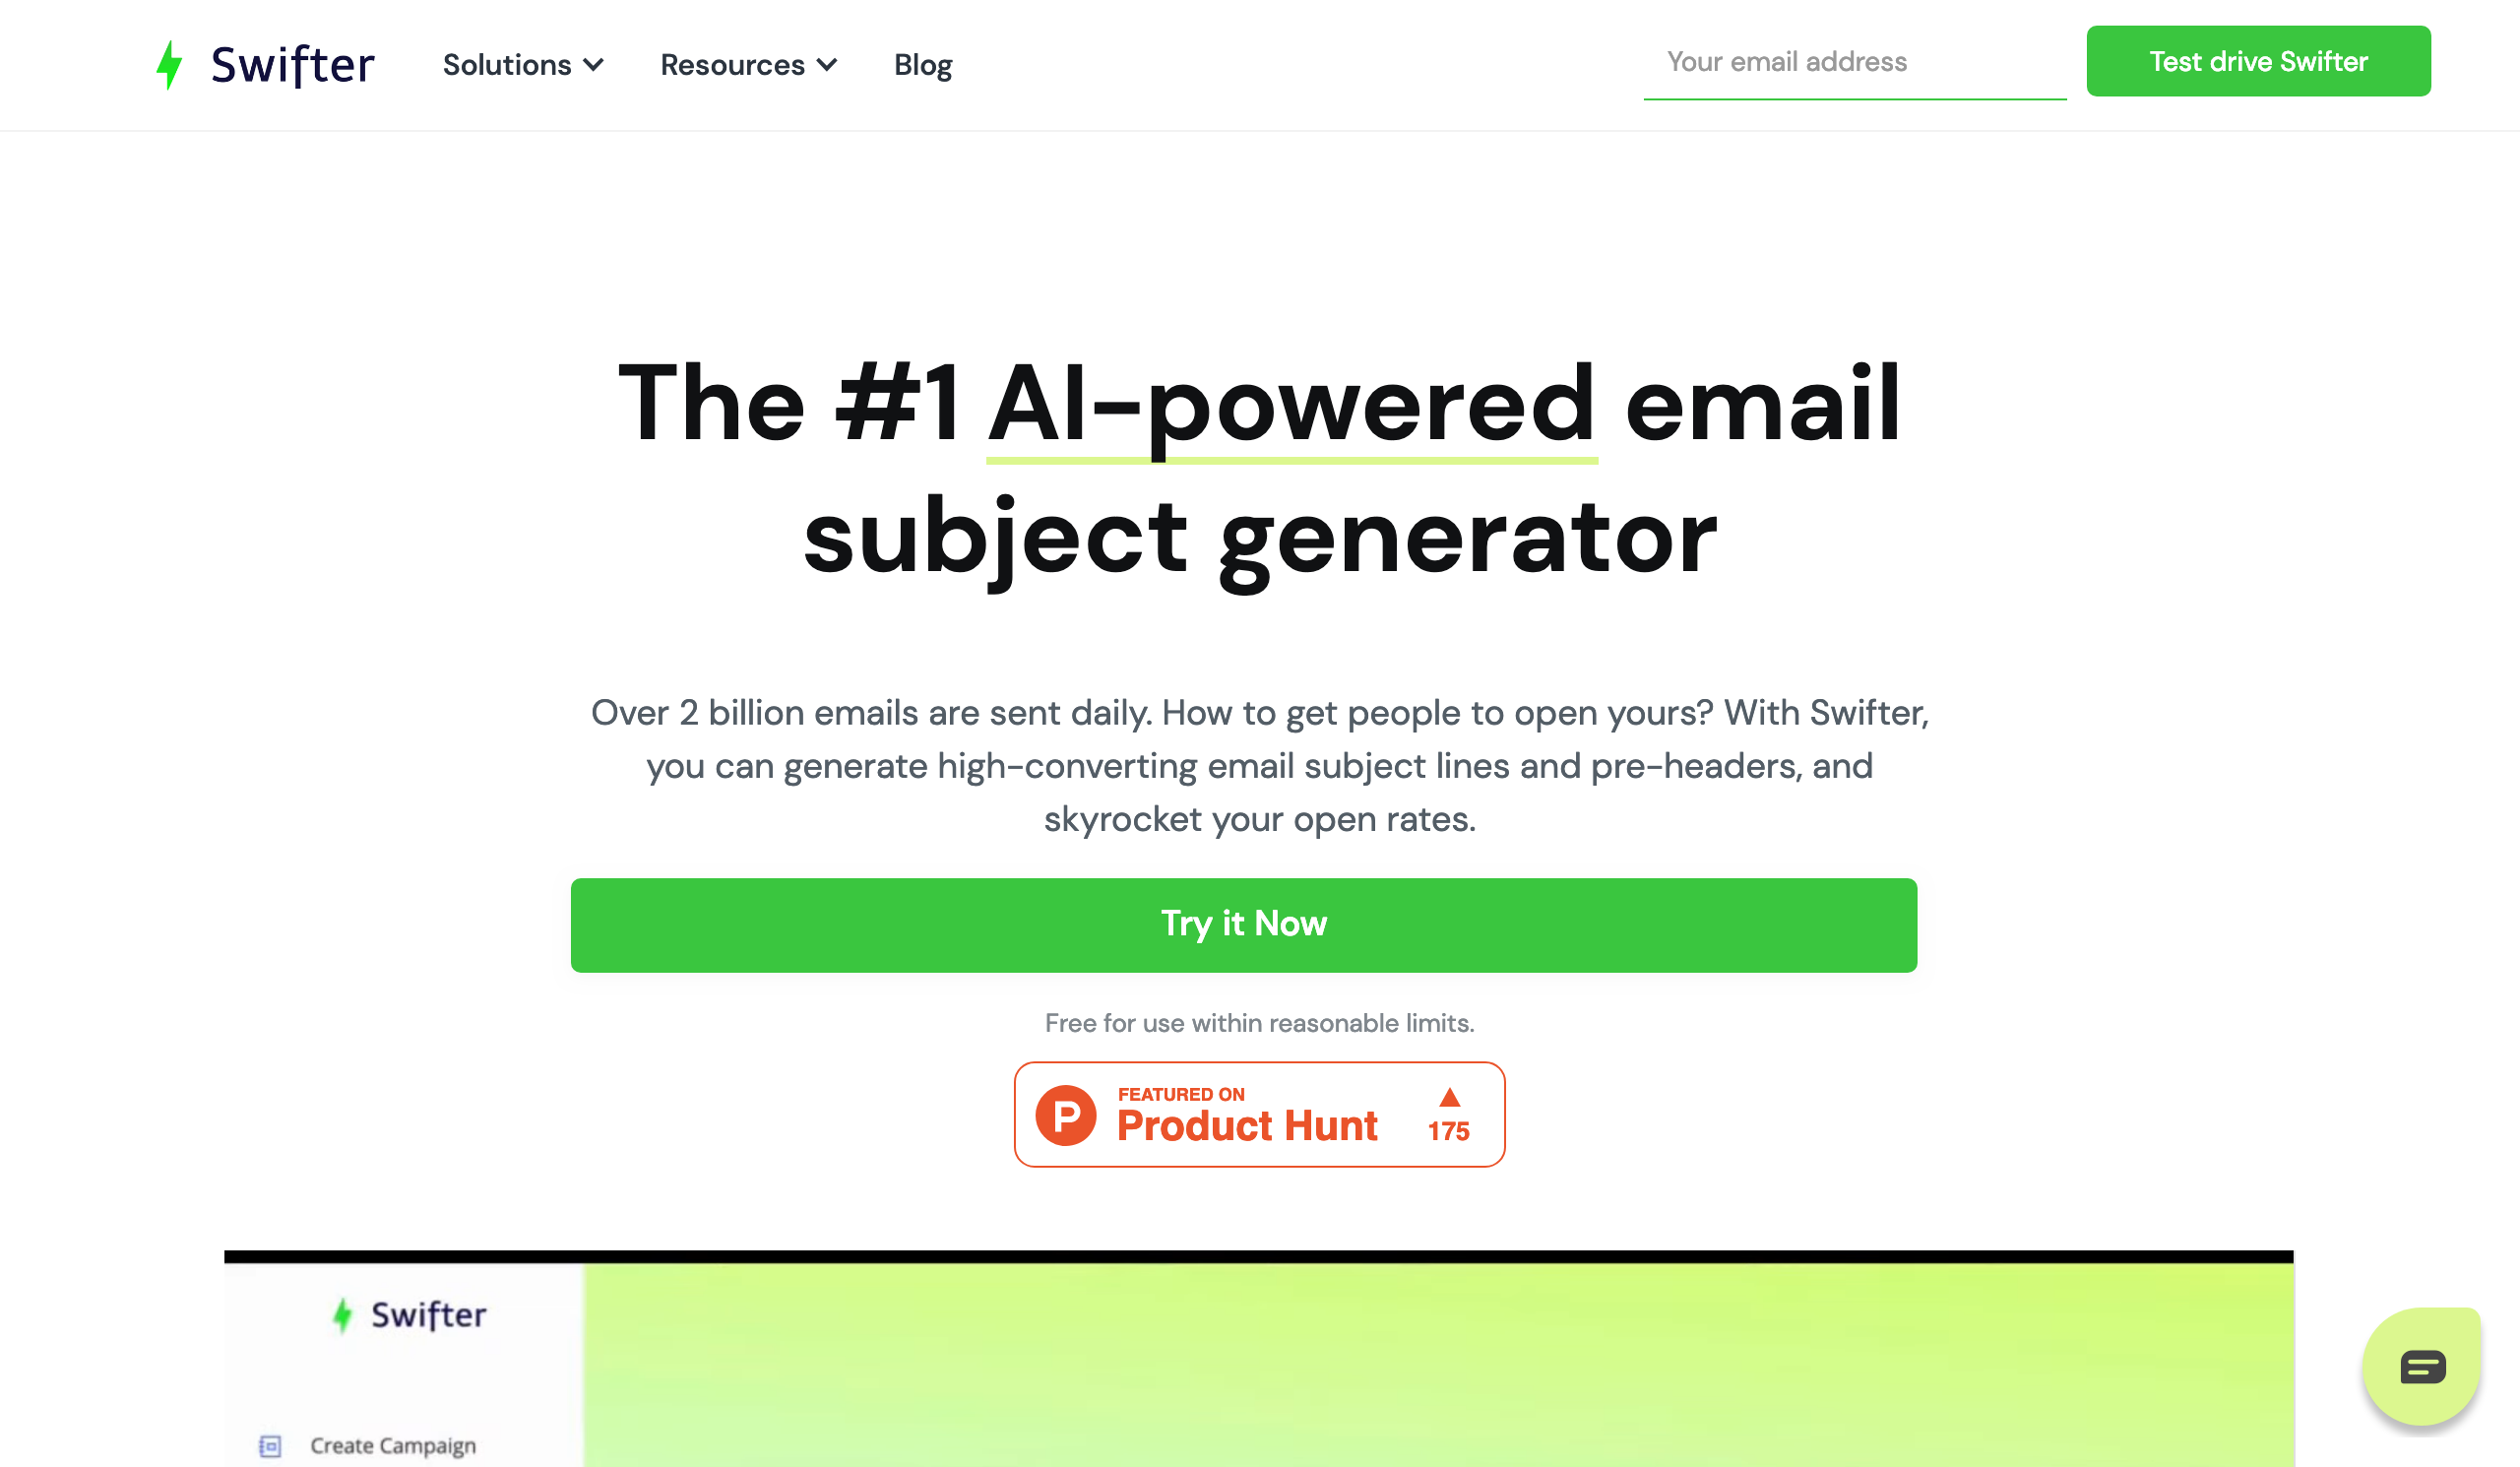 Email Subject Generator by Swifter - screen 1